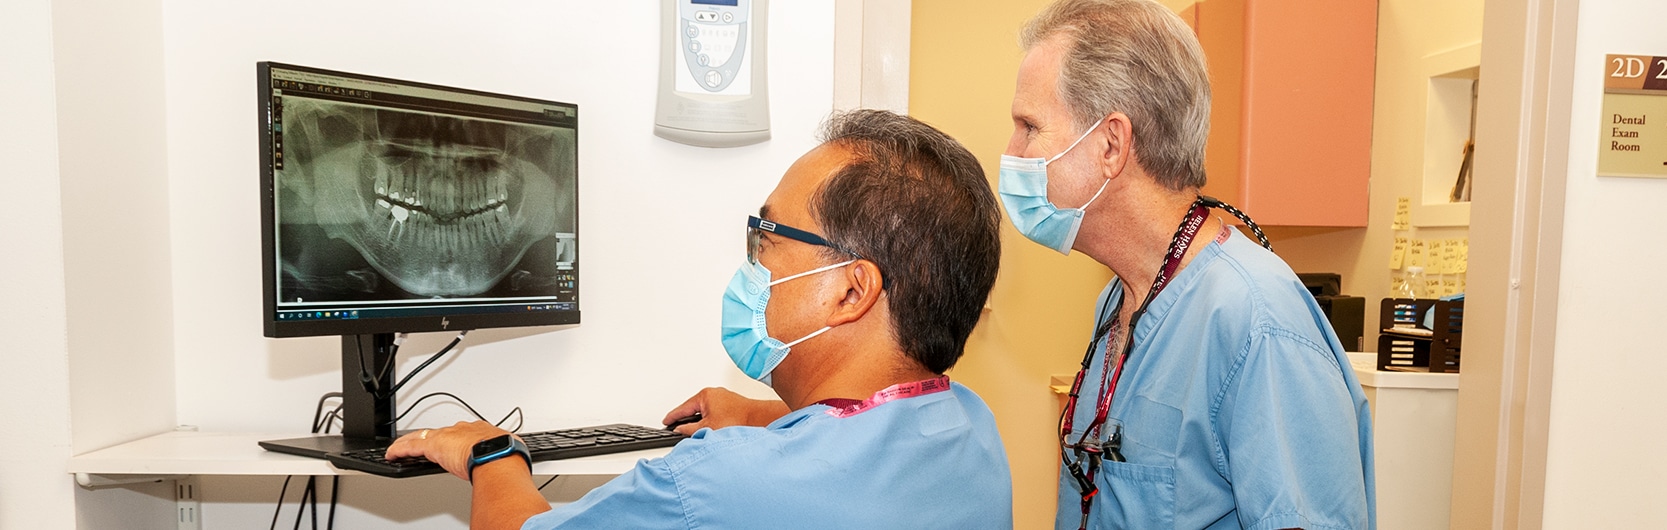 Dr. Nestor Santos sitting and Dr. Marc Michalowicz standing and reviewing a tooth X-ray on a computer screen